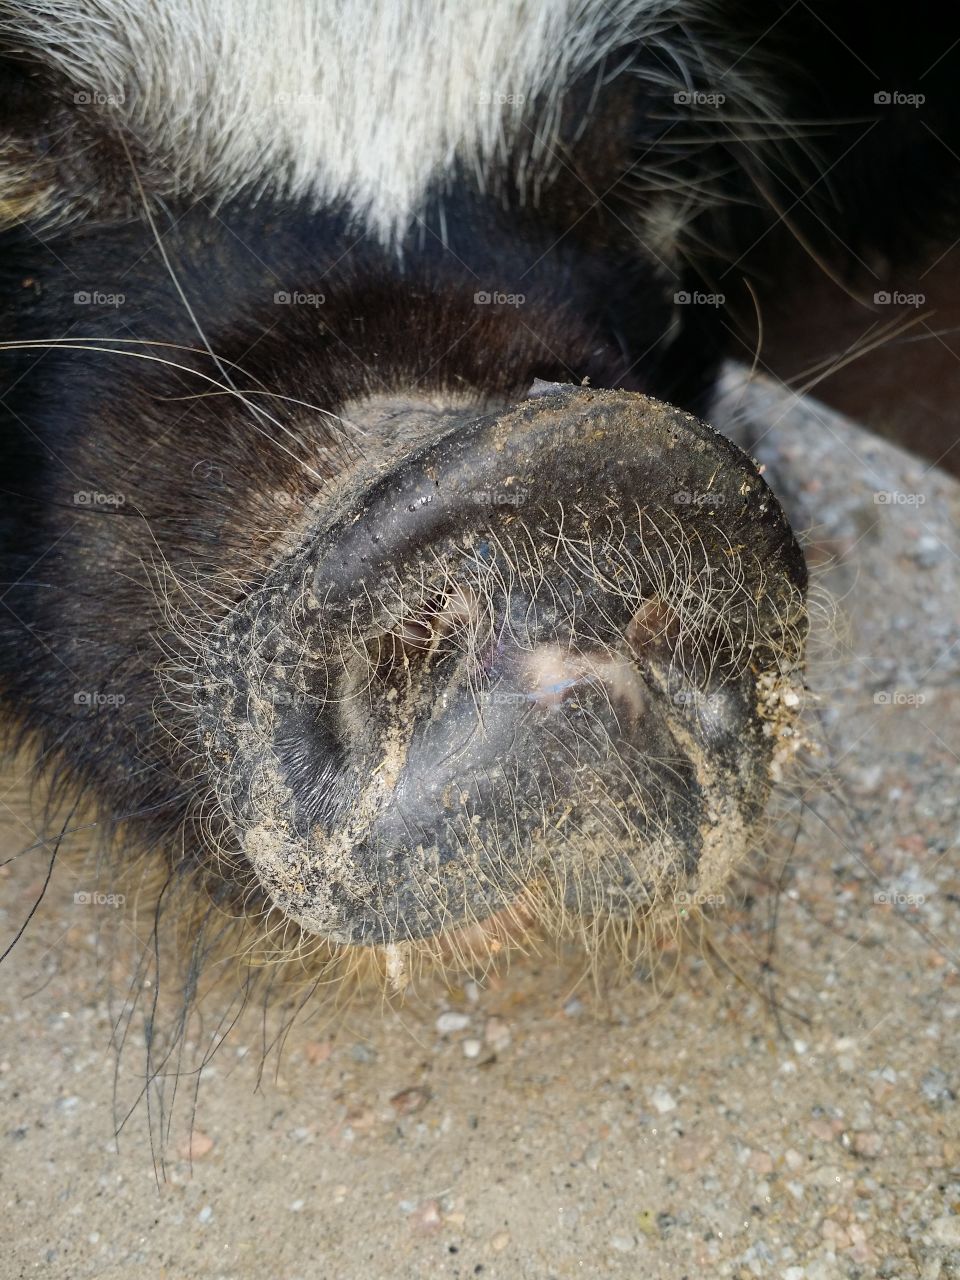 Nosey Pig. Took this picture of this little guy on my farm.